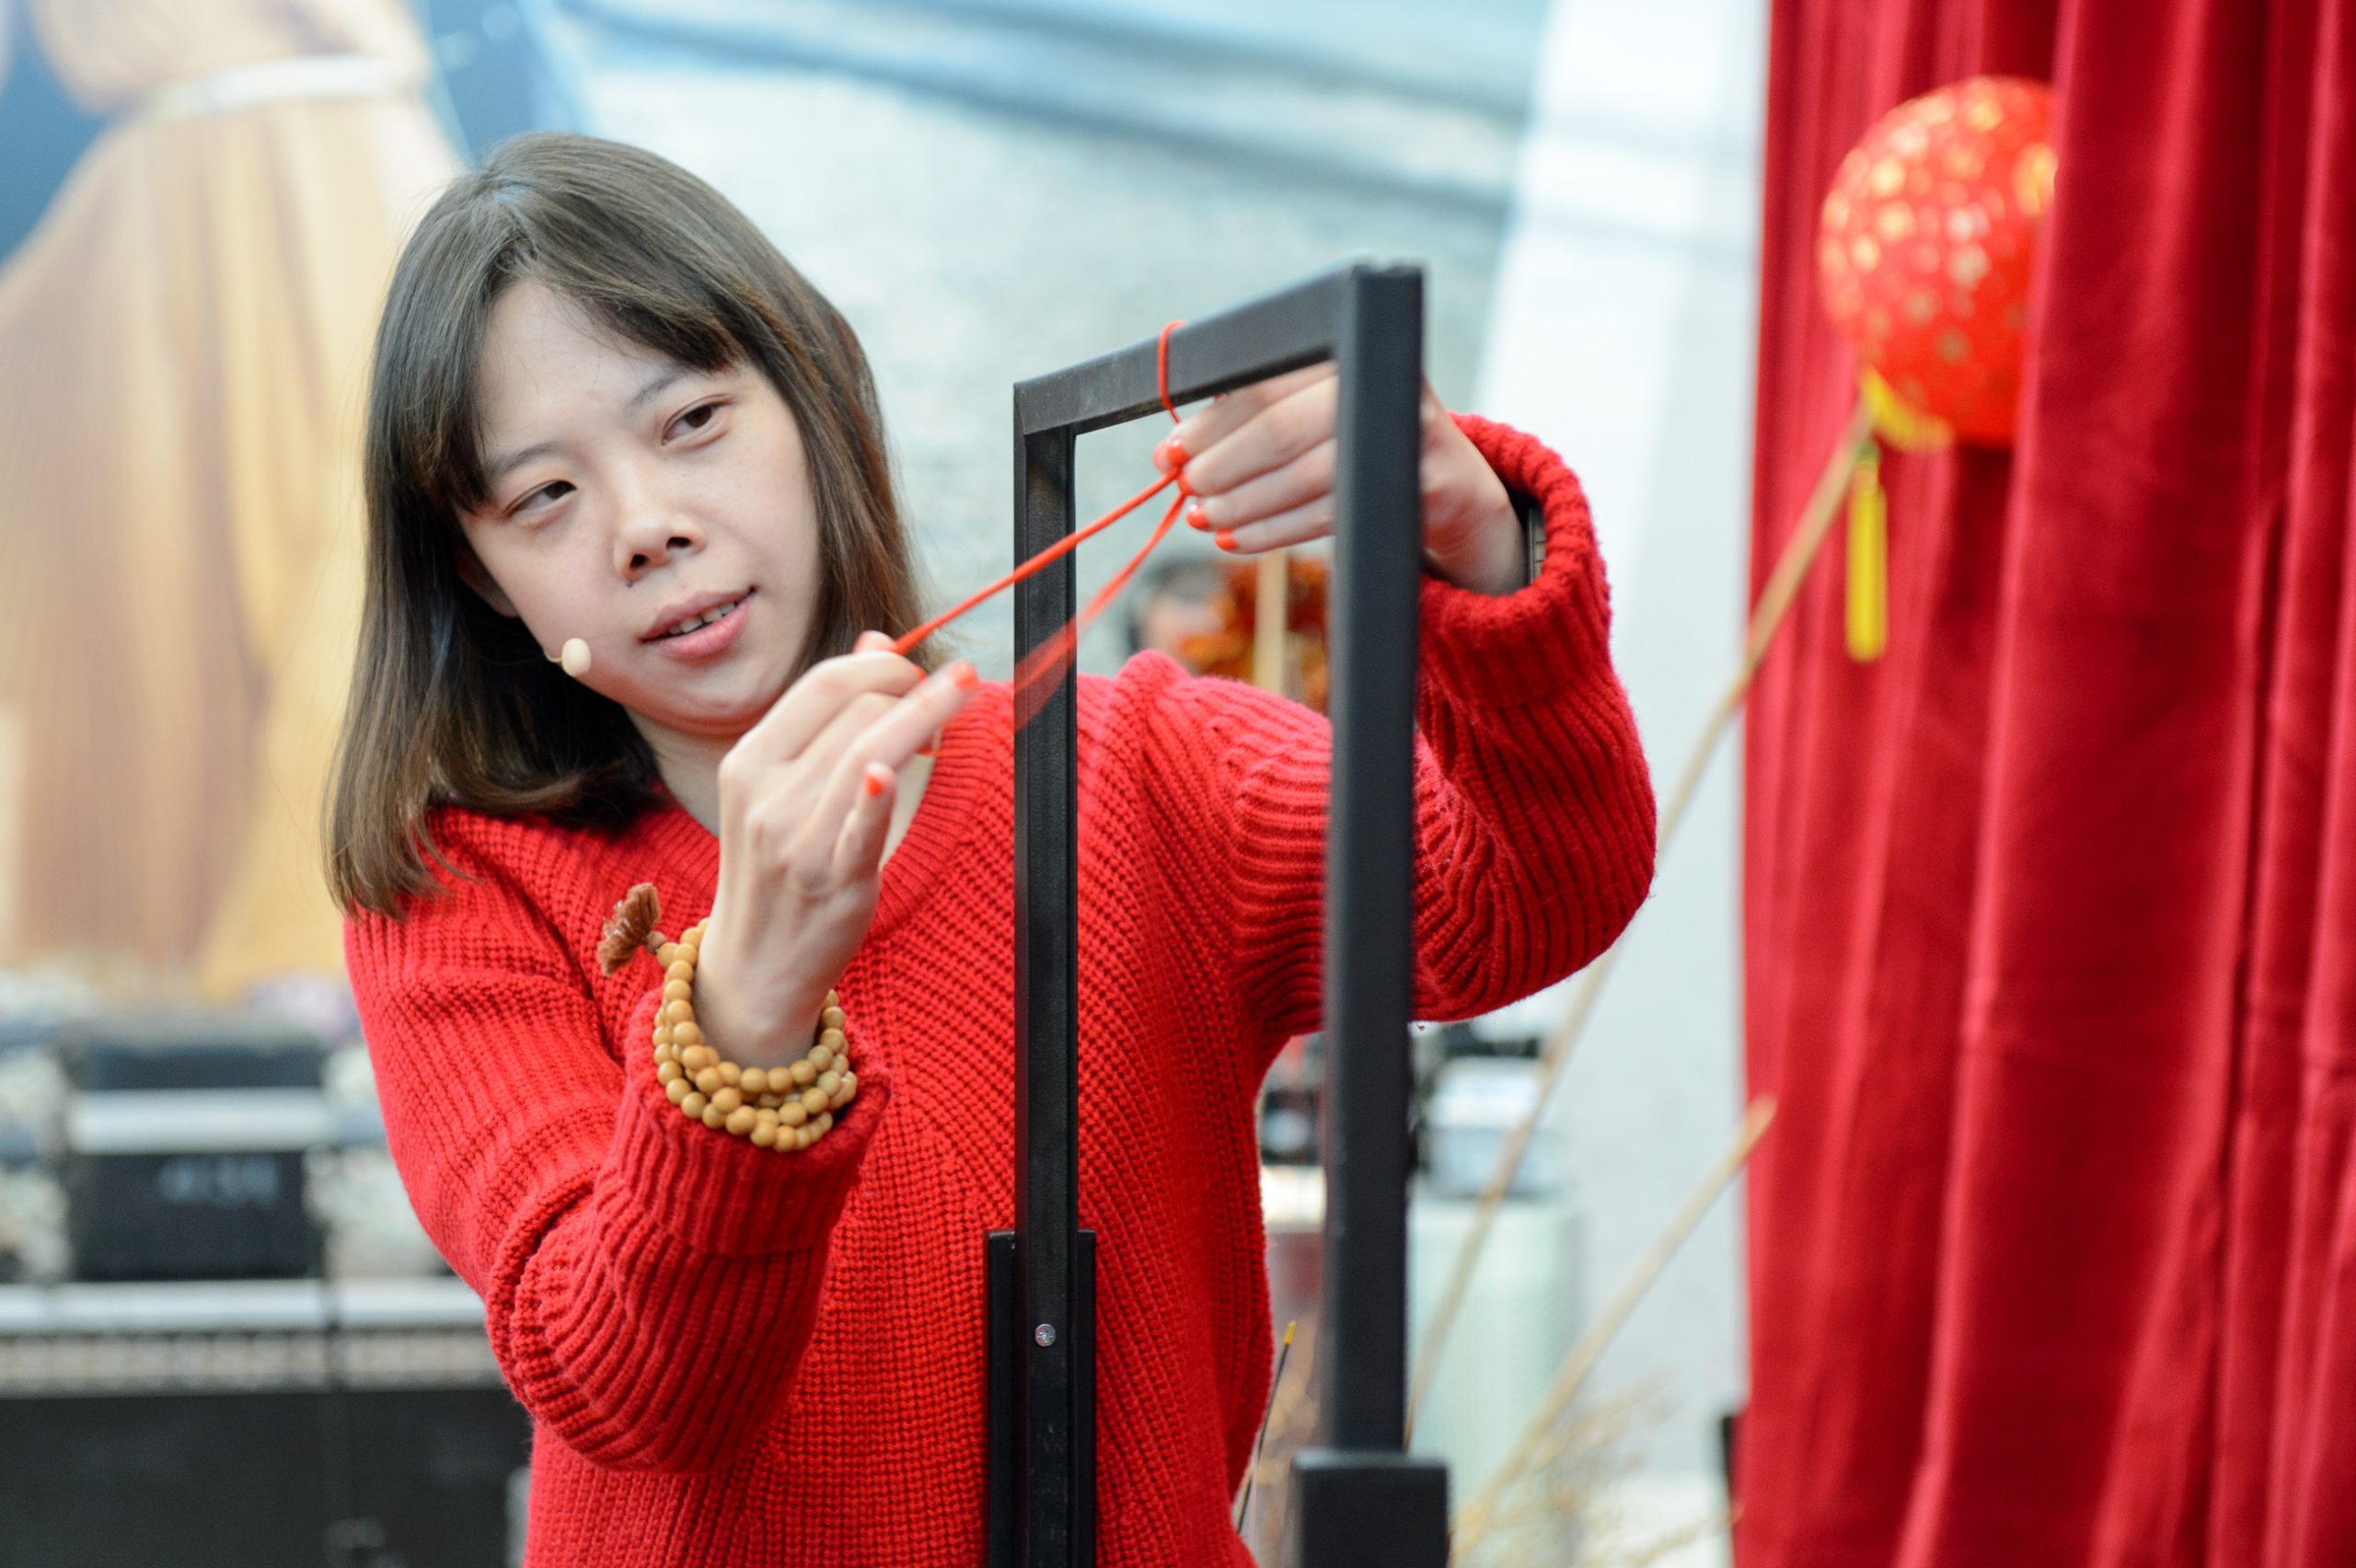 Live Demonstration at Lunar New Year celebration at the Concourse in Tysons Corner Center